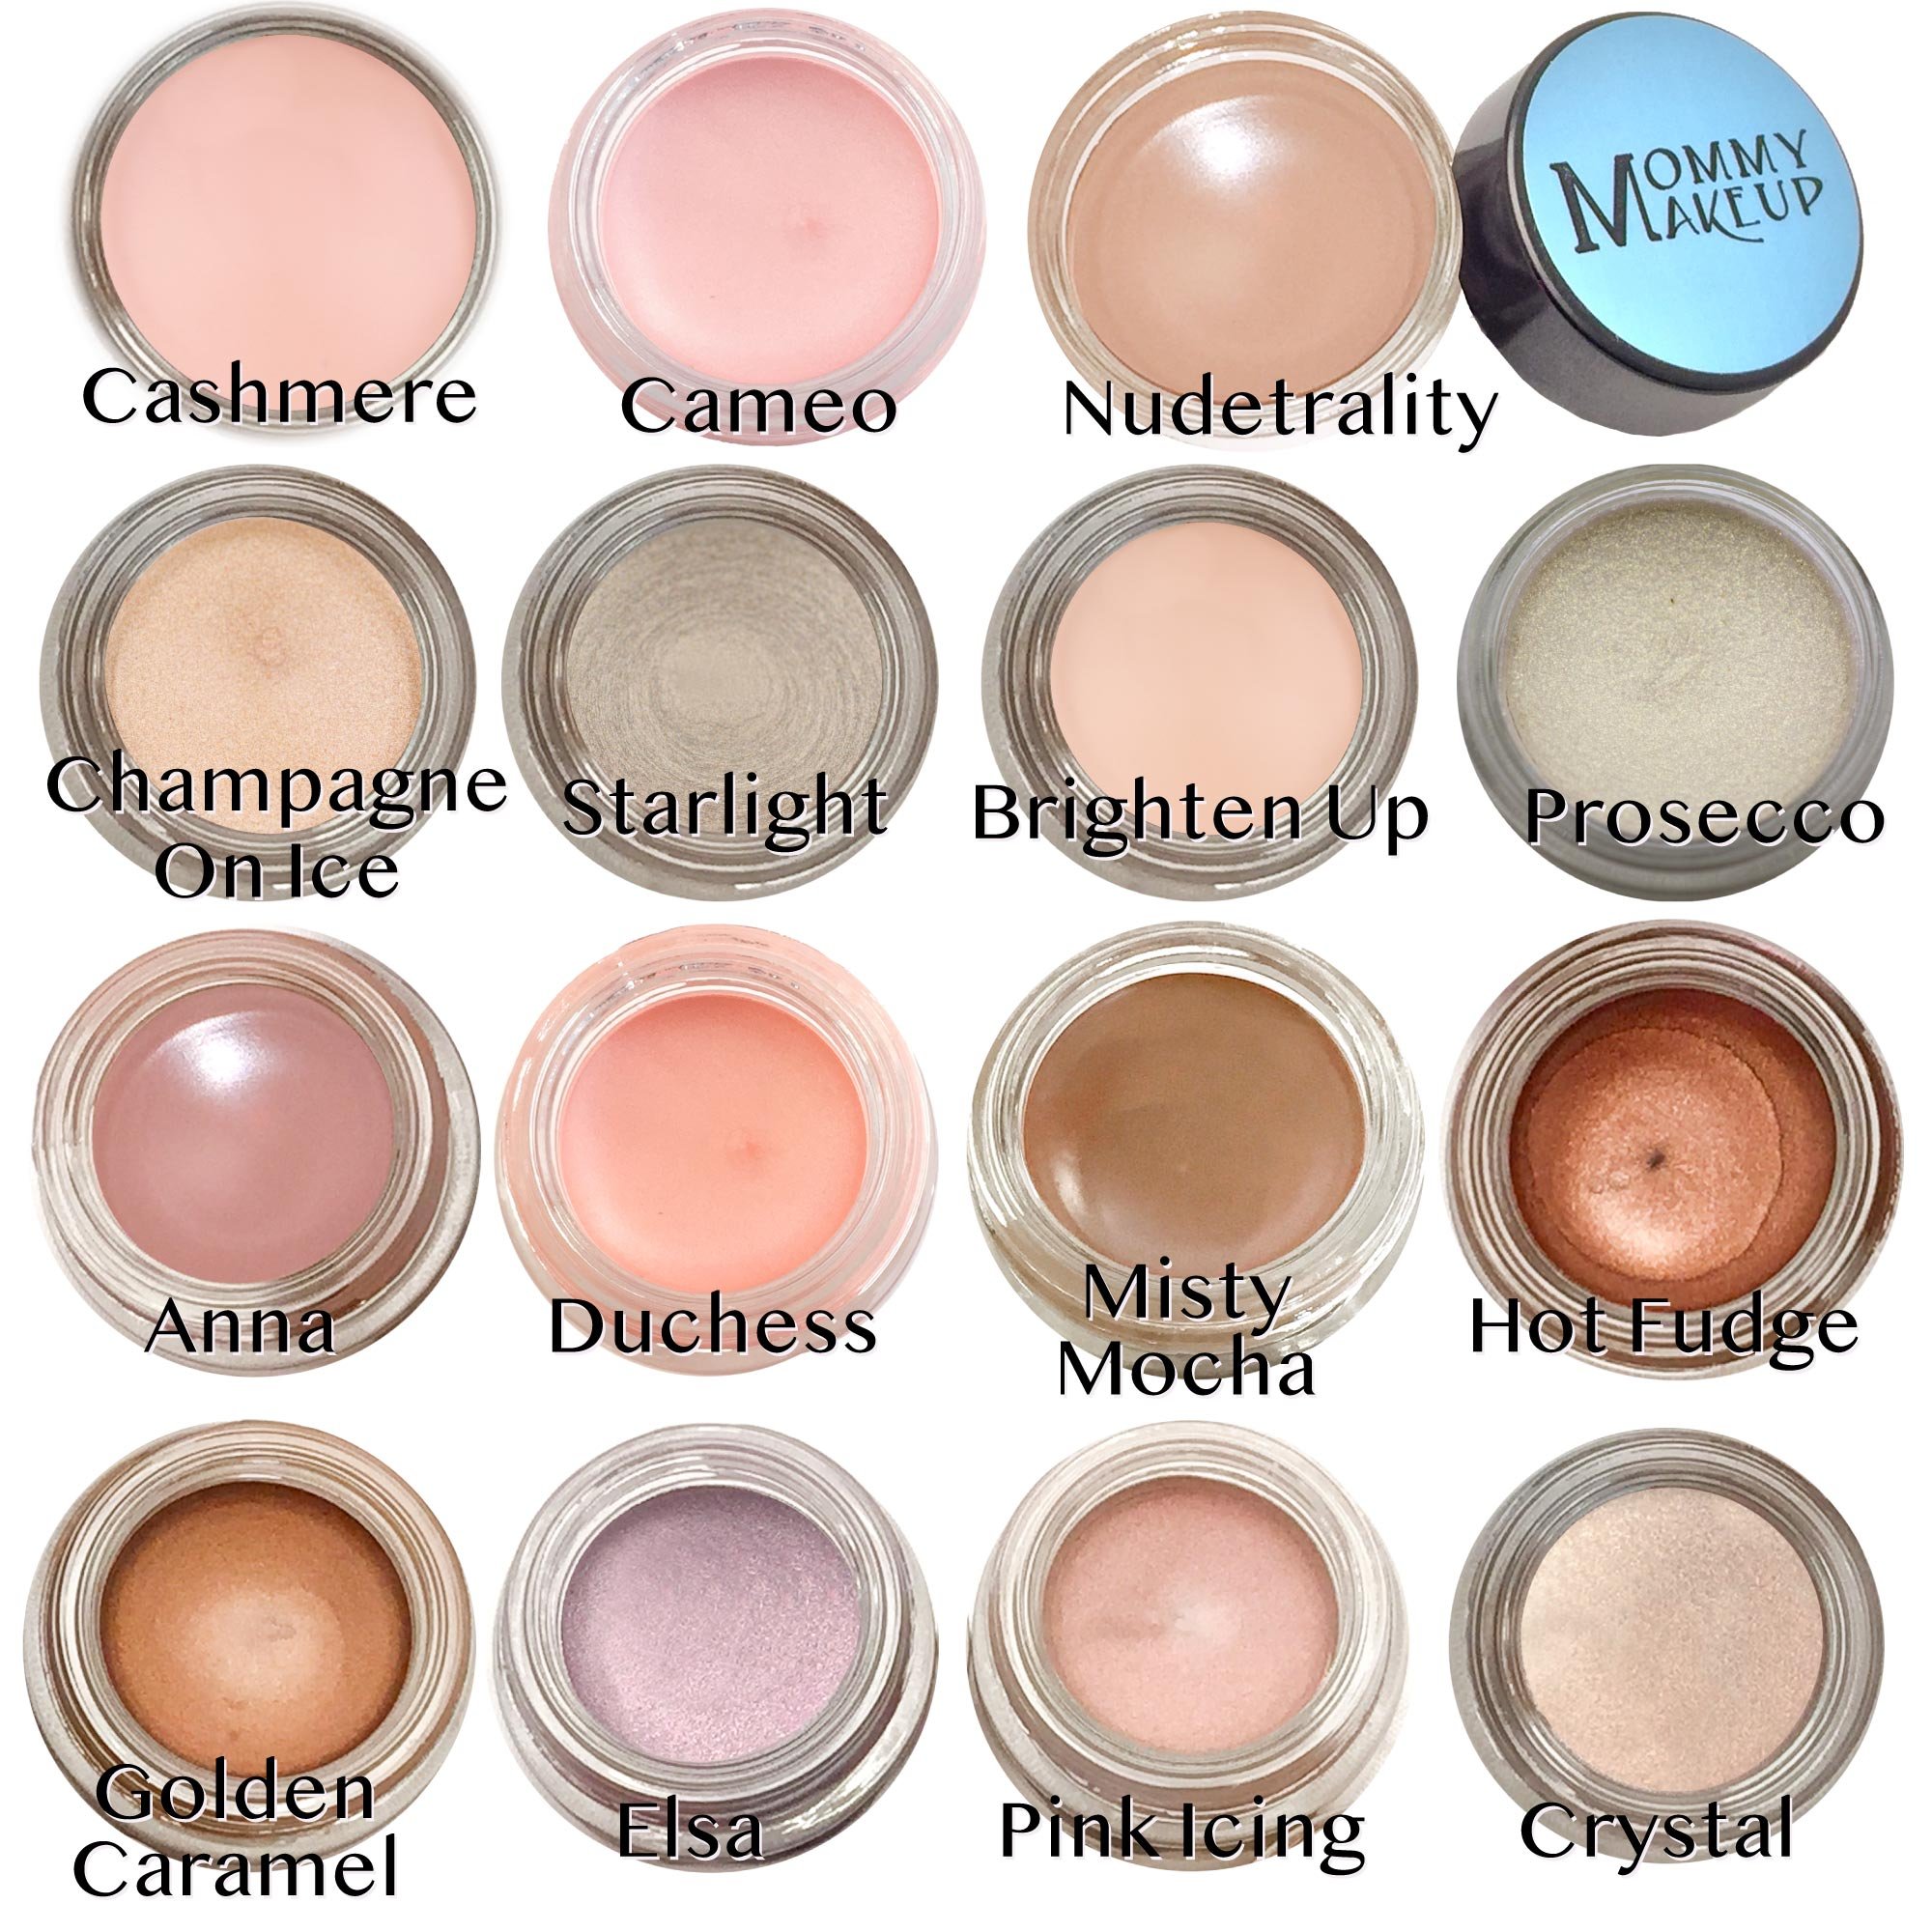 Any Wear Creme in Anna (a matte warm rosy beige) - The ultimate multi-tasking cosmetic - Smudge-proof Eye Shadow, Cheek Color, and Lip Color all-in-one by Mommy Makeup [Anna]